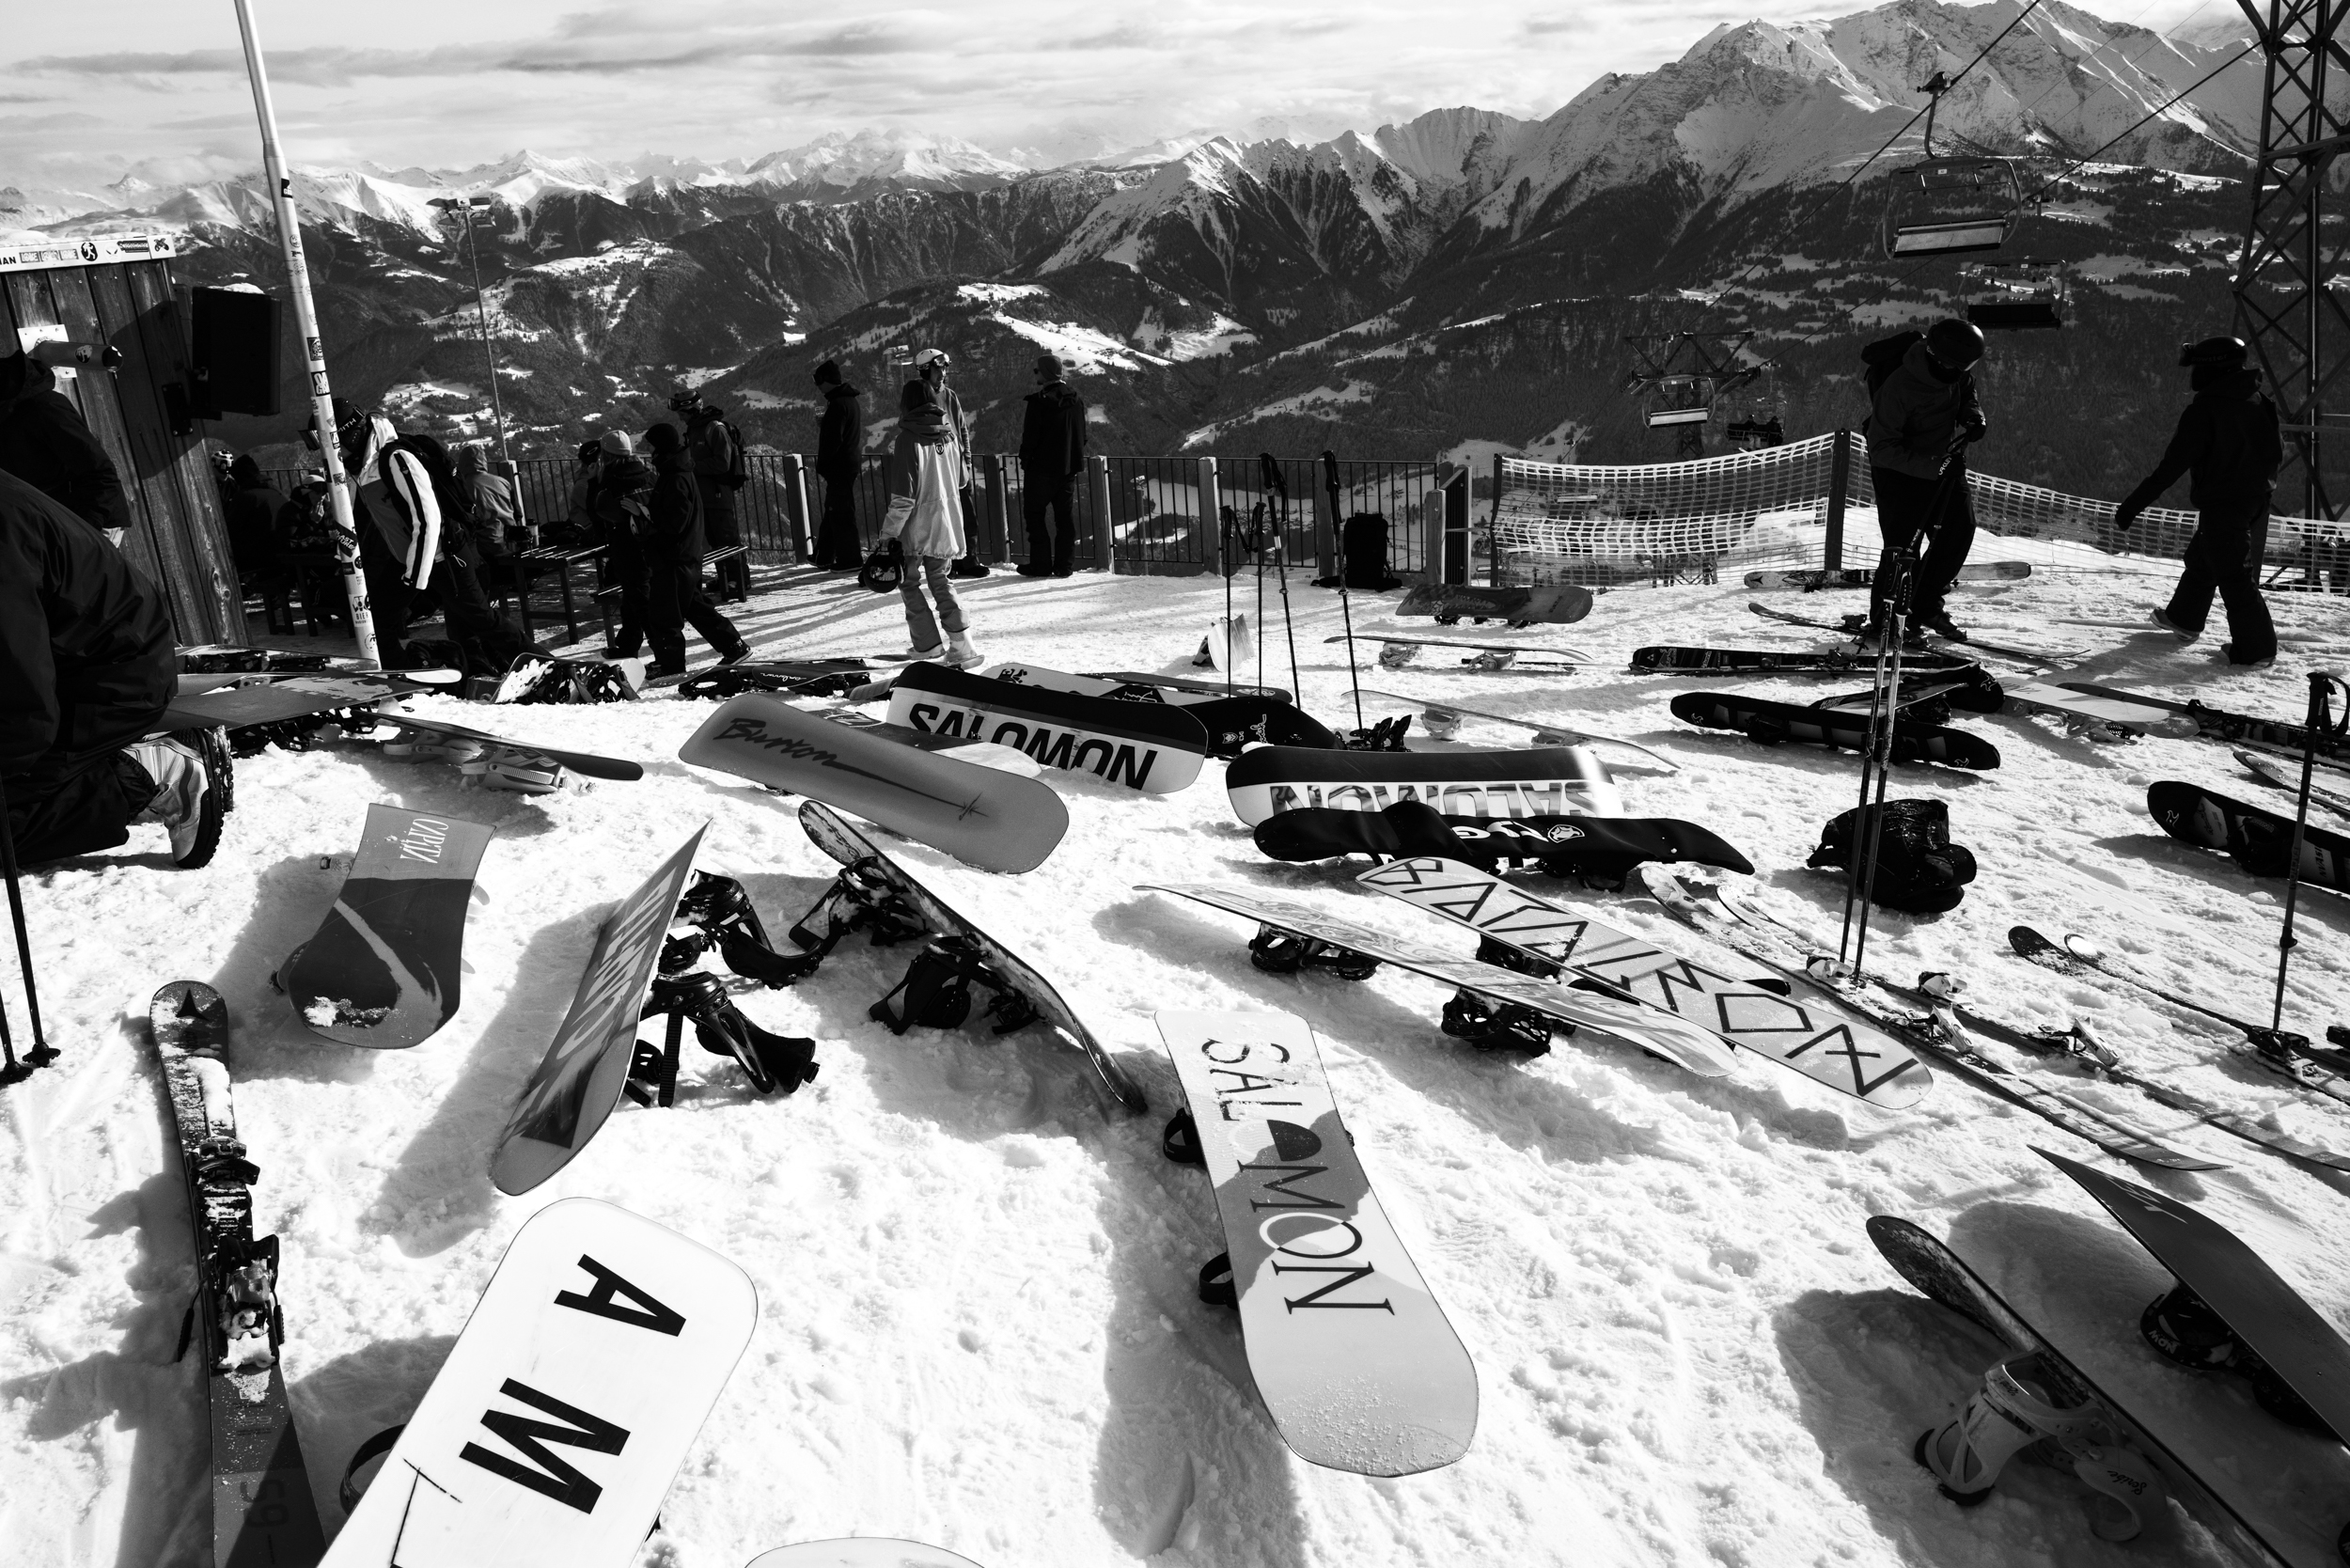 Athlete's snowboards in Laax.